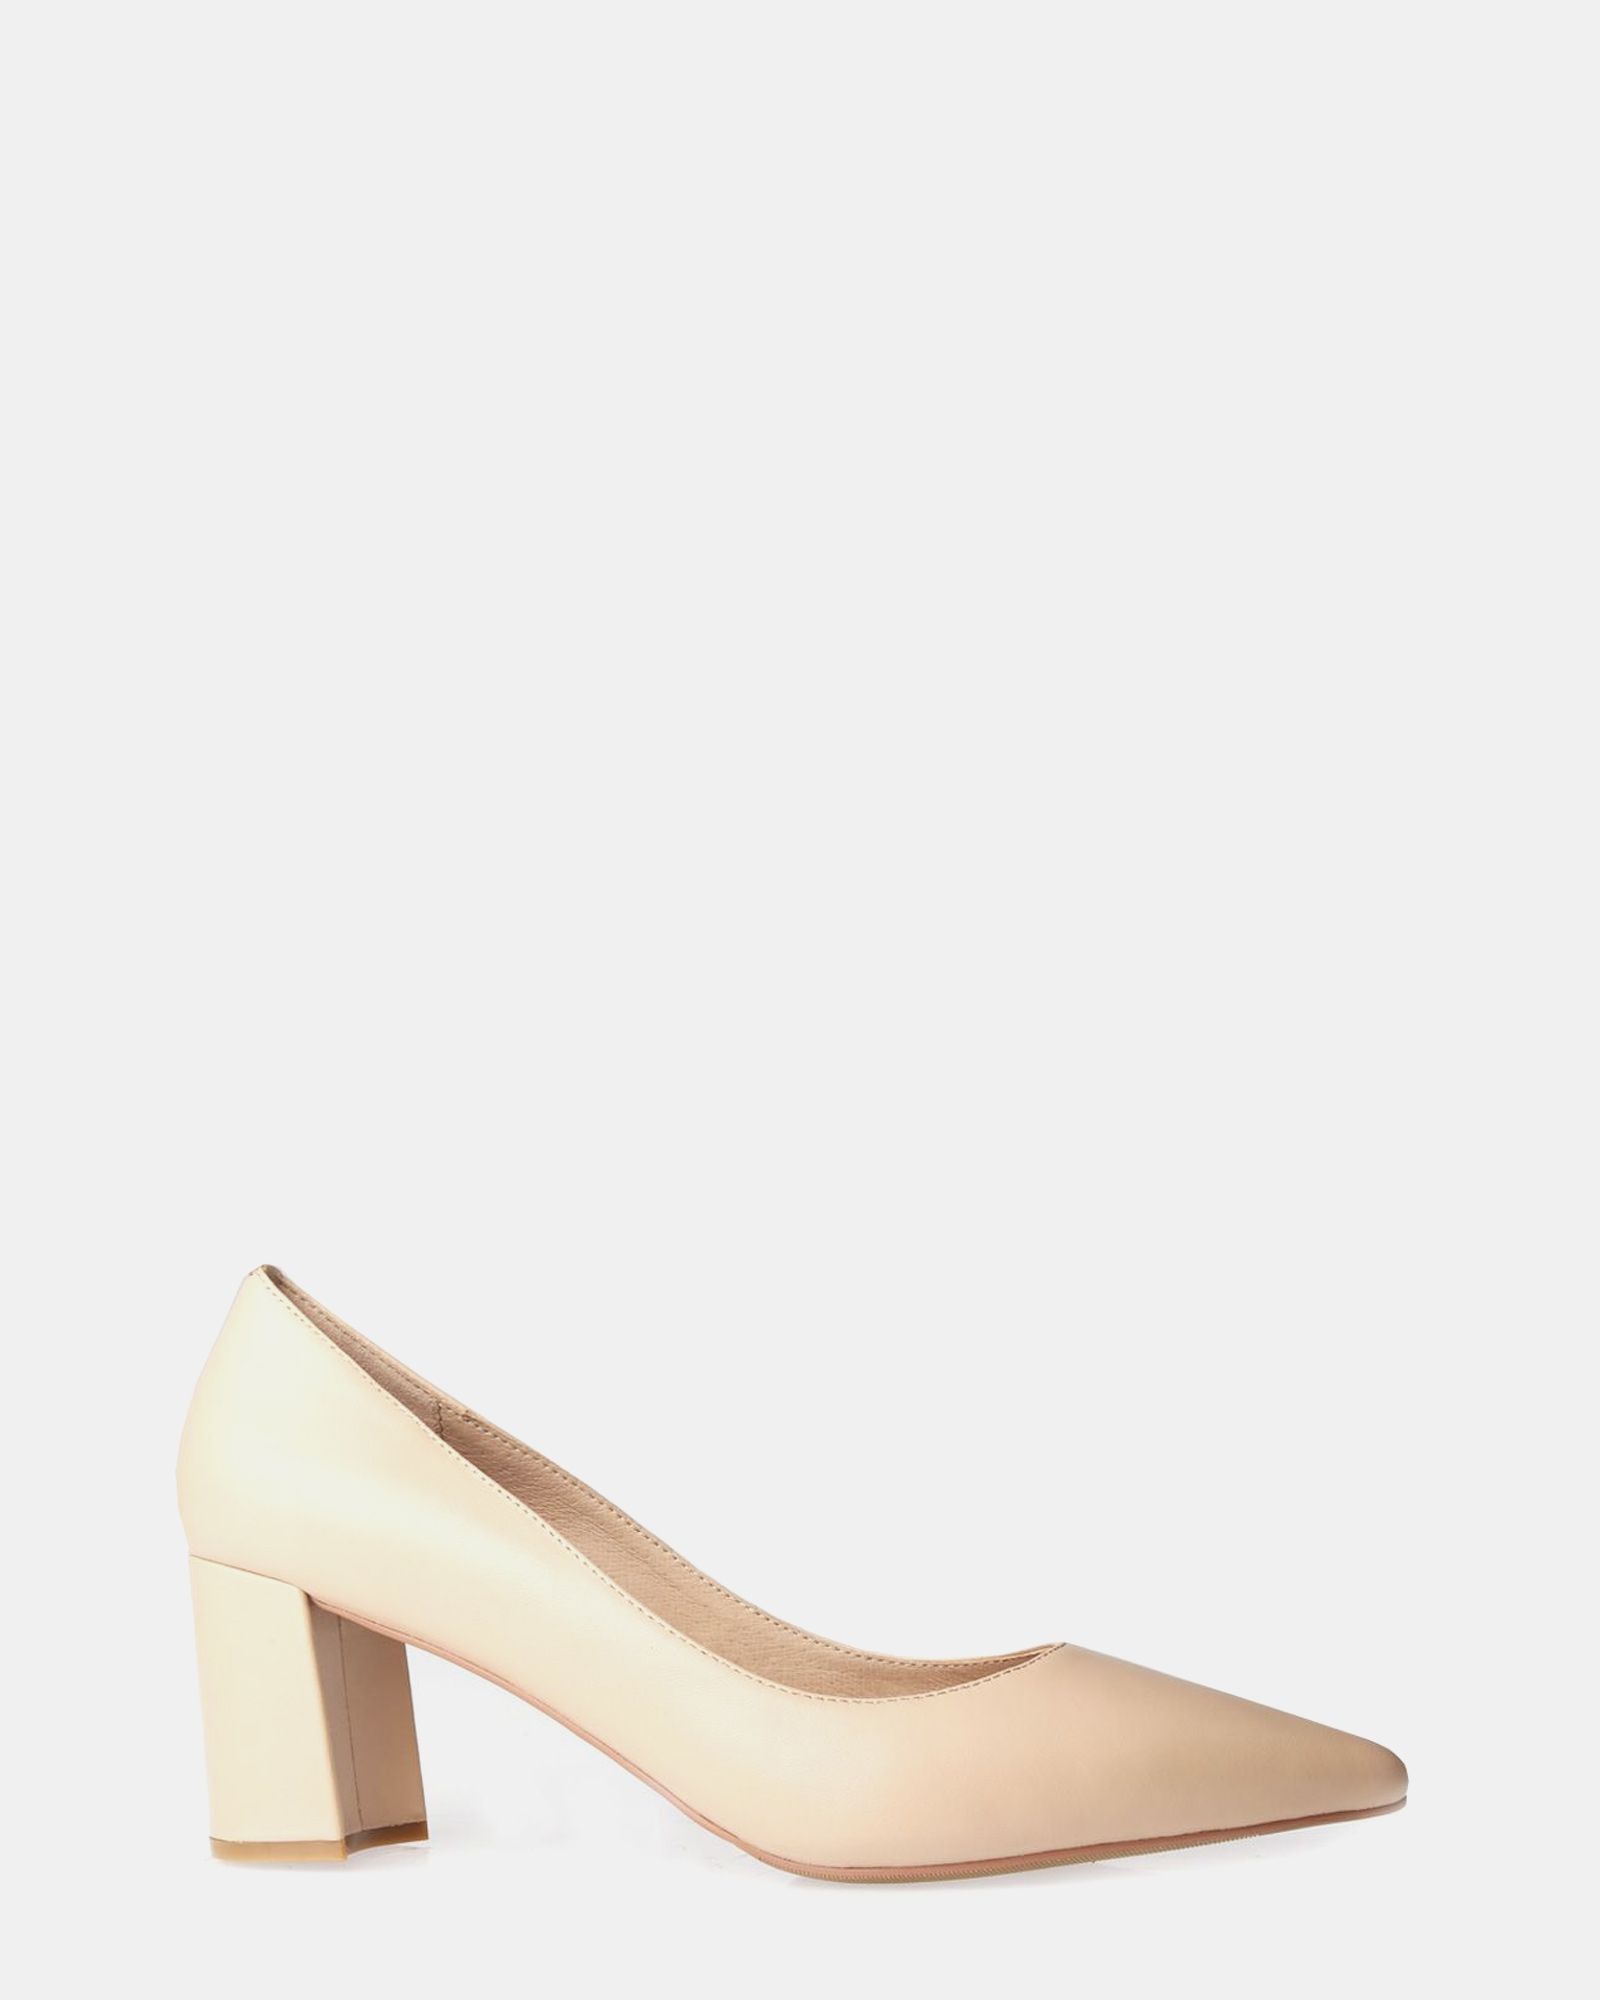 Miss Sofie Ruth Heels - Blush Leather | Shoe Connection AU